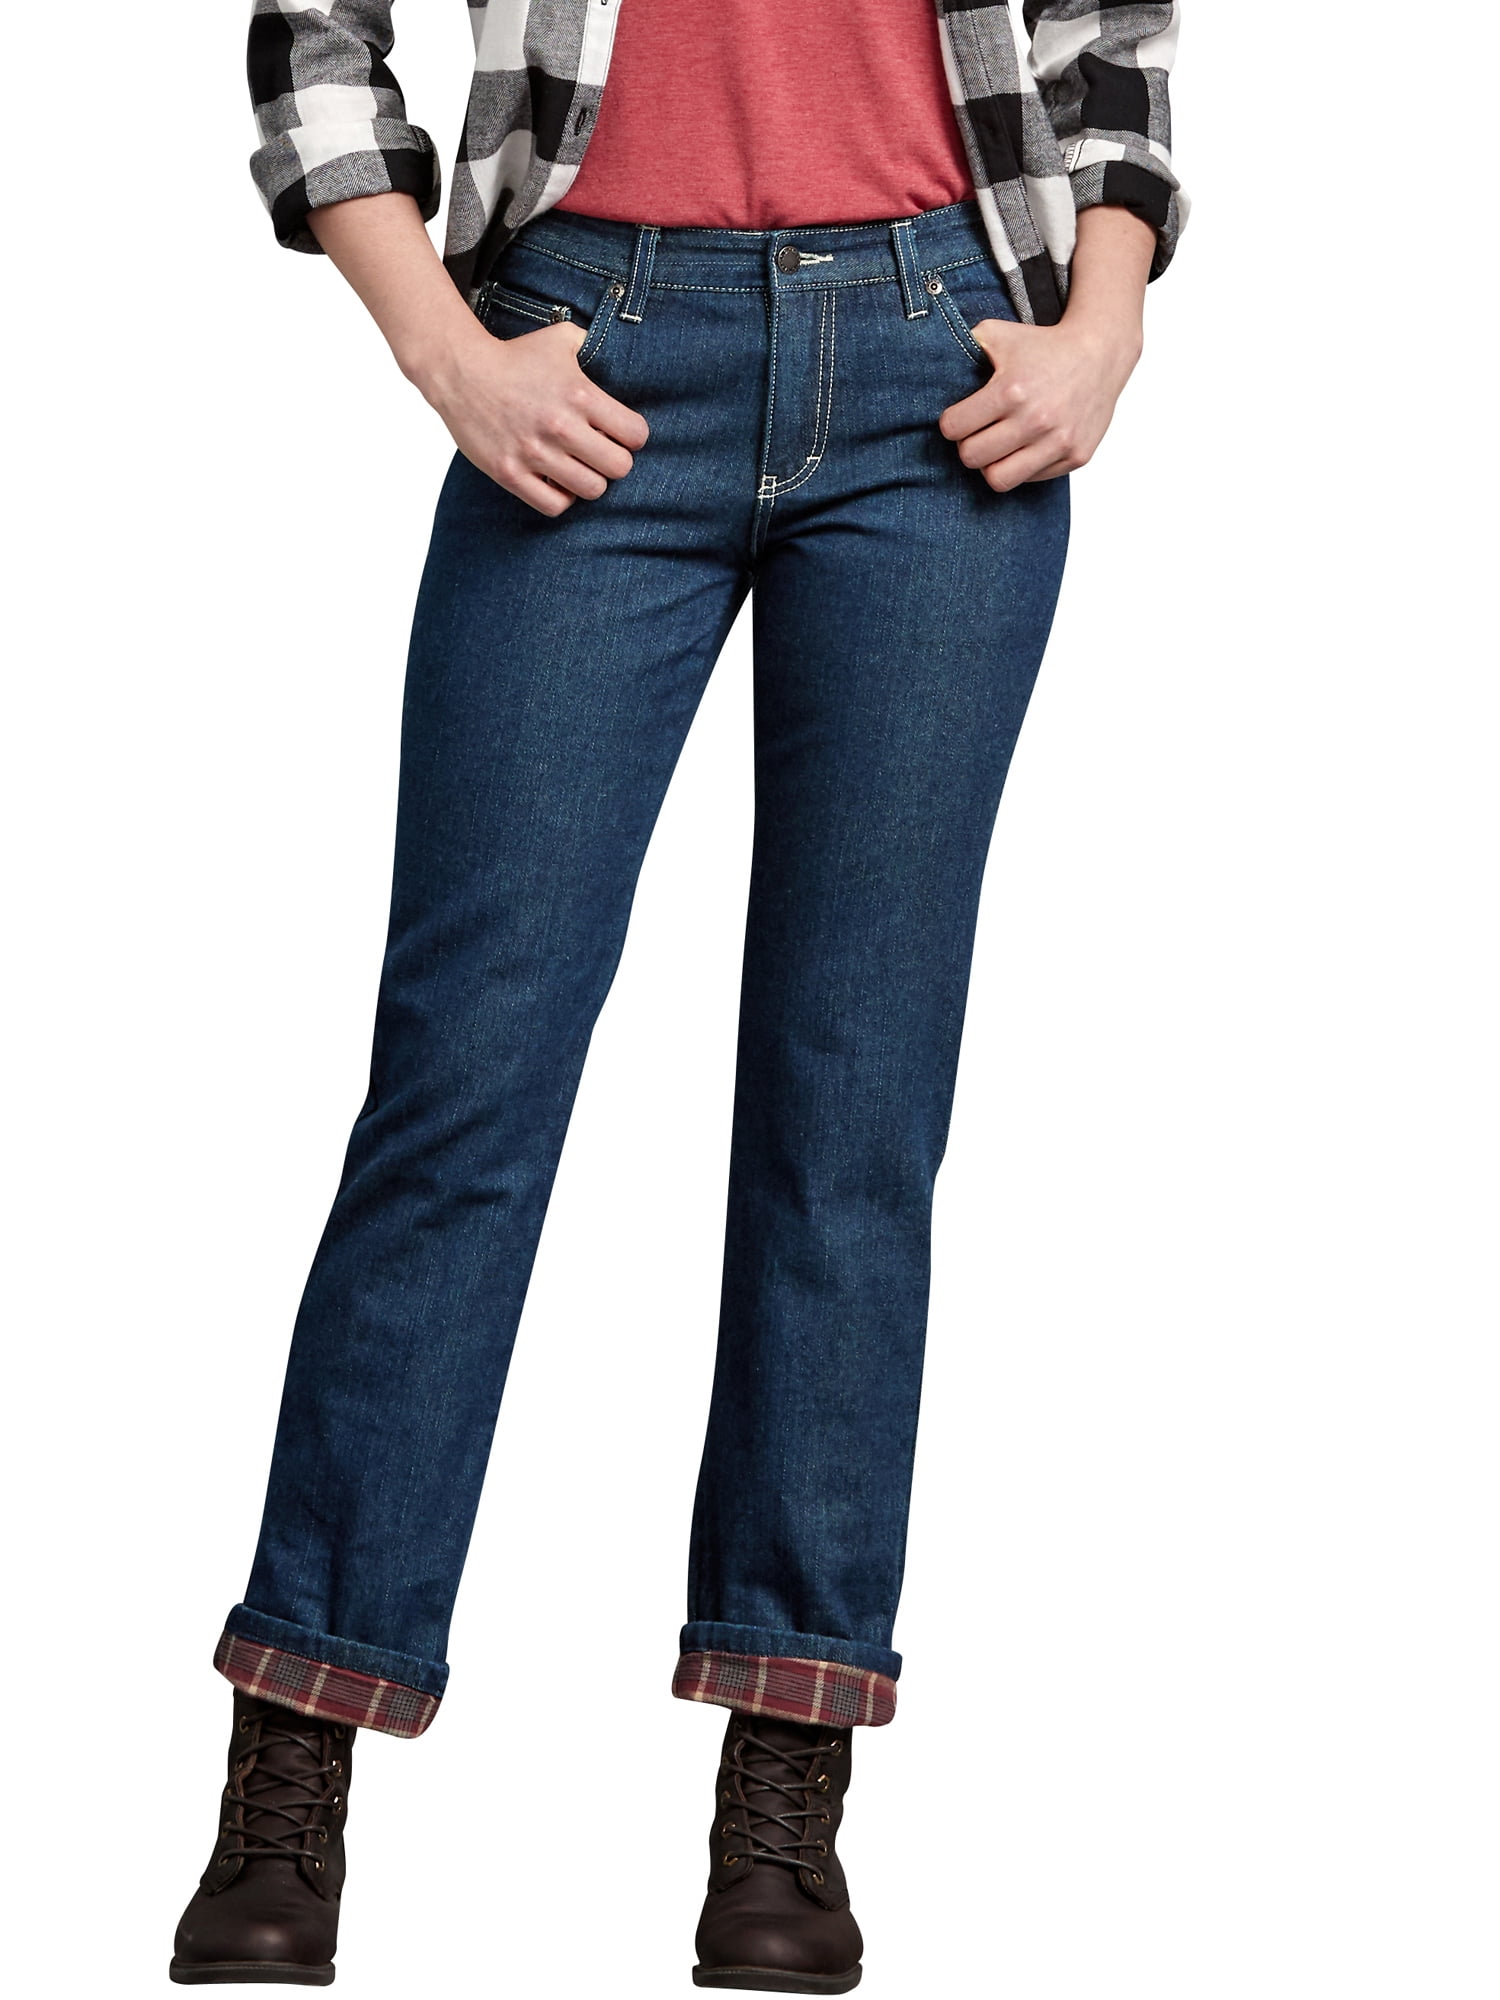 flannel lined blue jeans